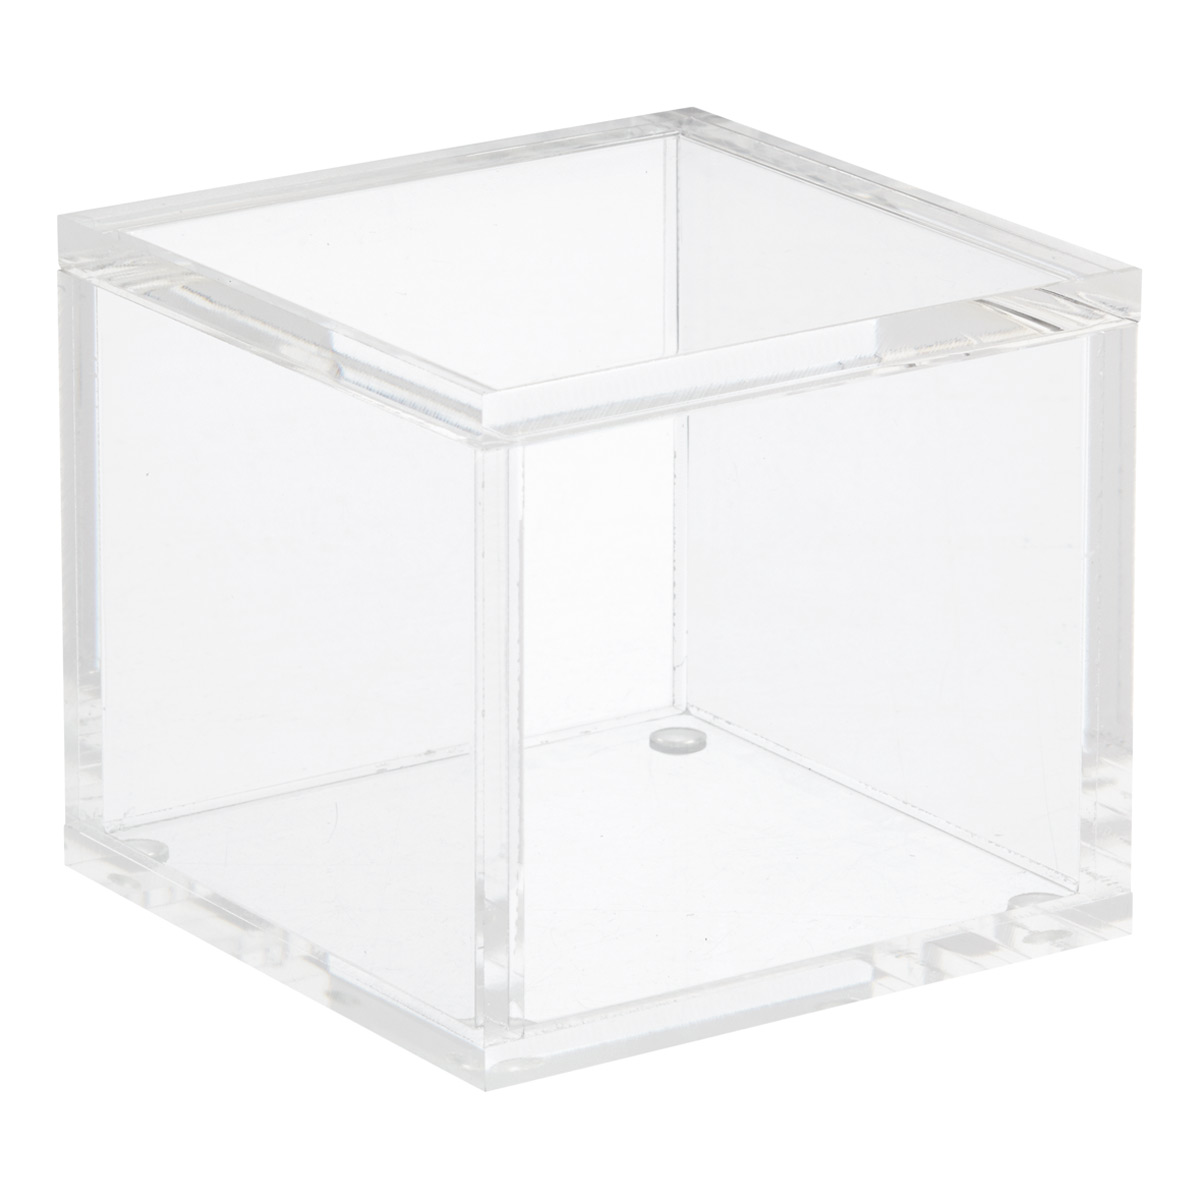 https://www.containerstore.com/catalogimages/283768/10069011SquareAcrylicCanisterMed_120.jpg